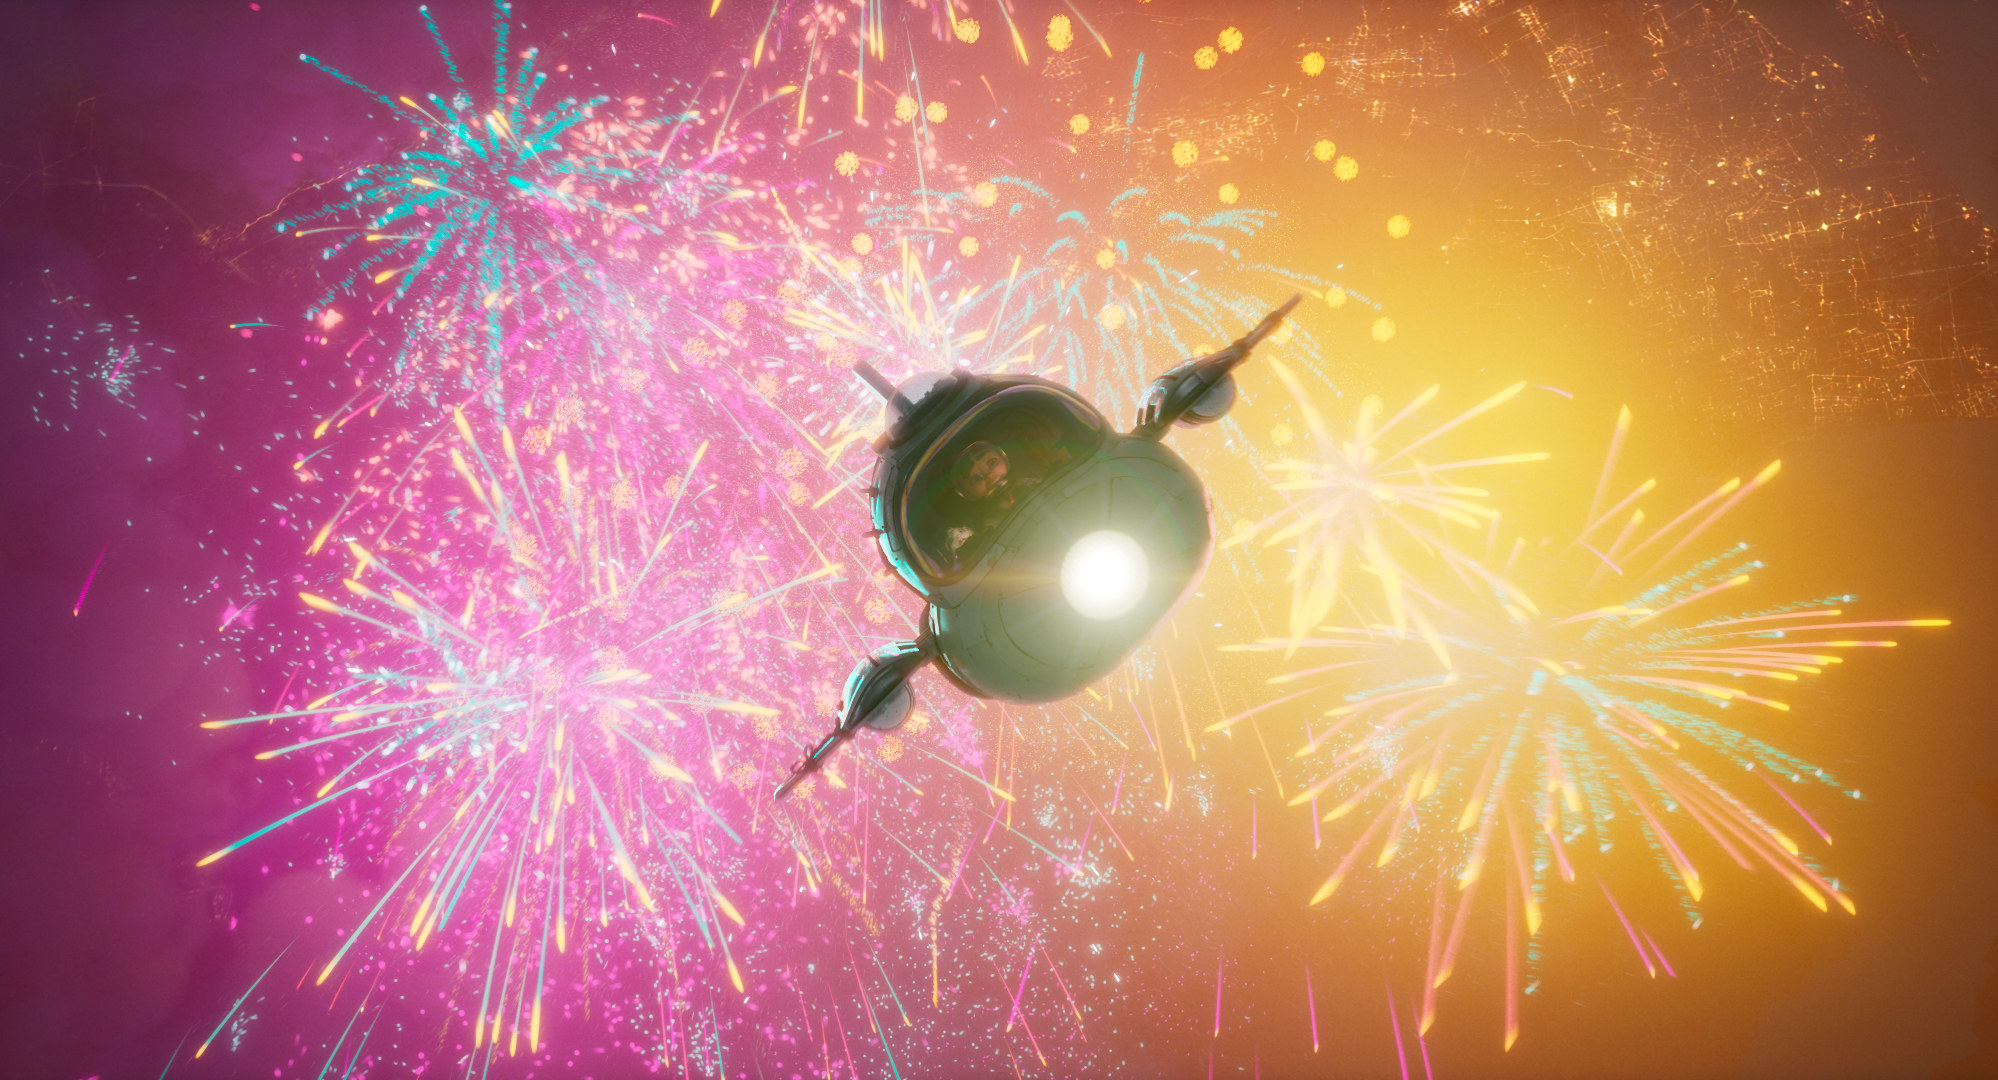 spaceship and fireworks